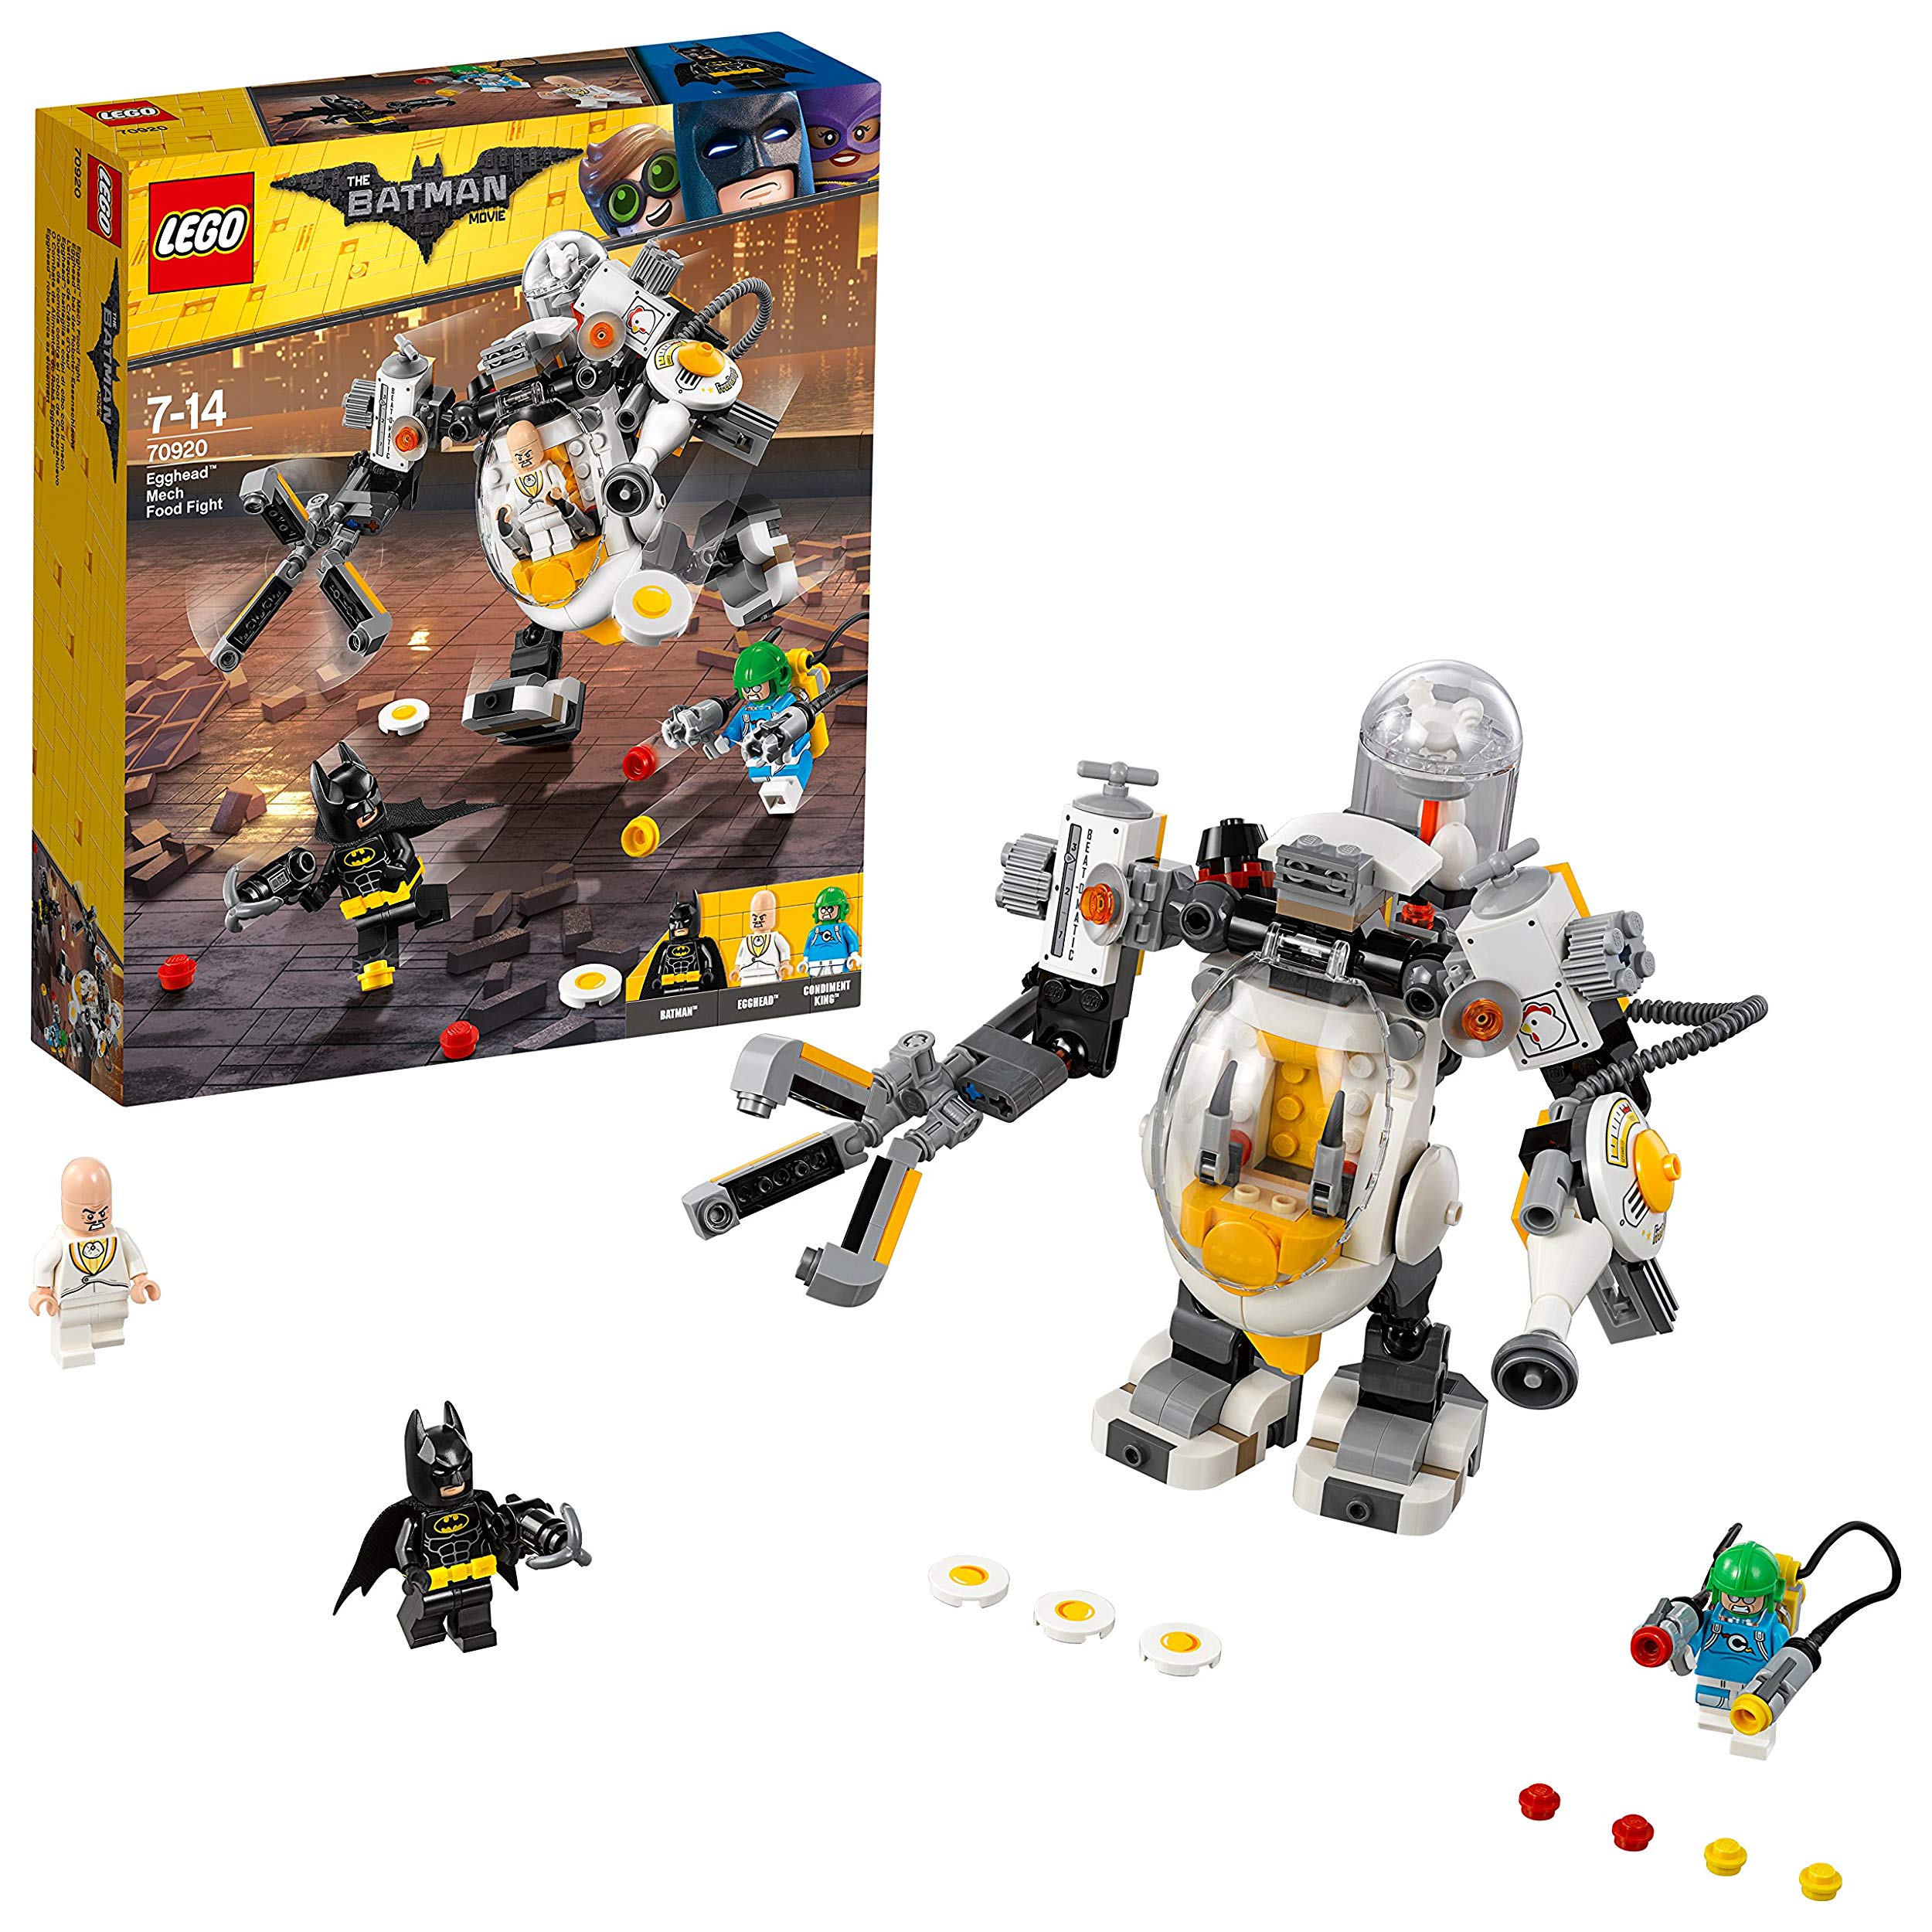 Lego The Movie Egghead At The Robot Eating Batman Battle Toy